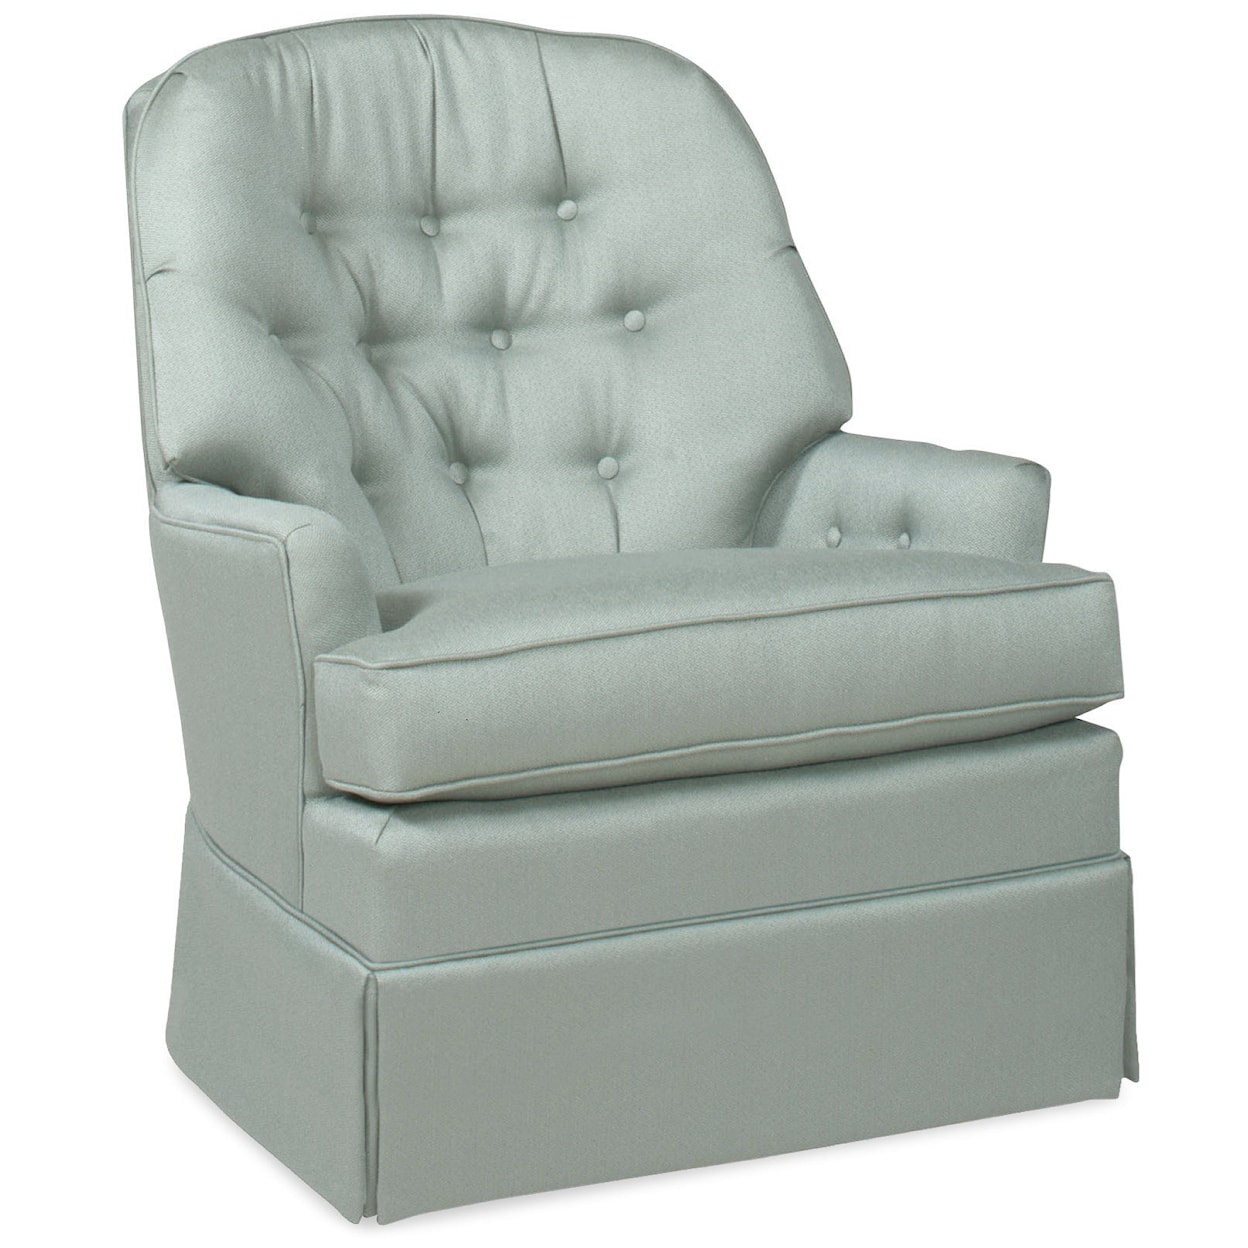 Temple Furniture Accent Chairs Stationary Chair